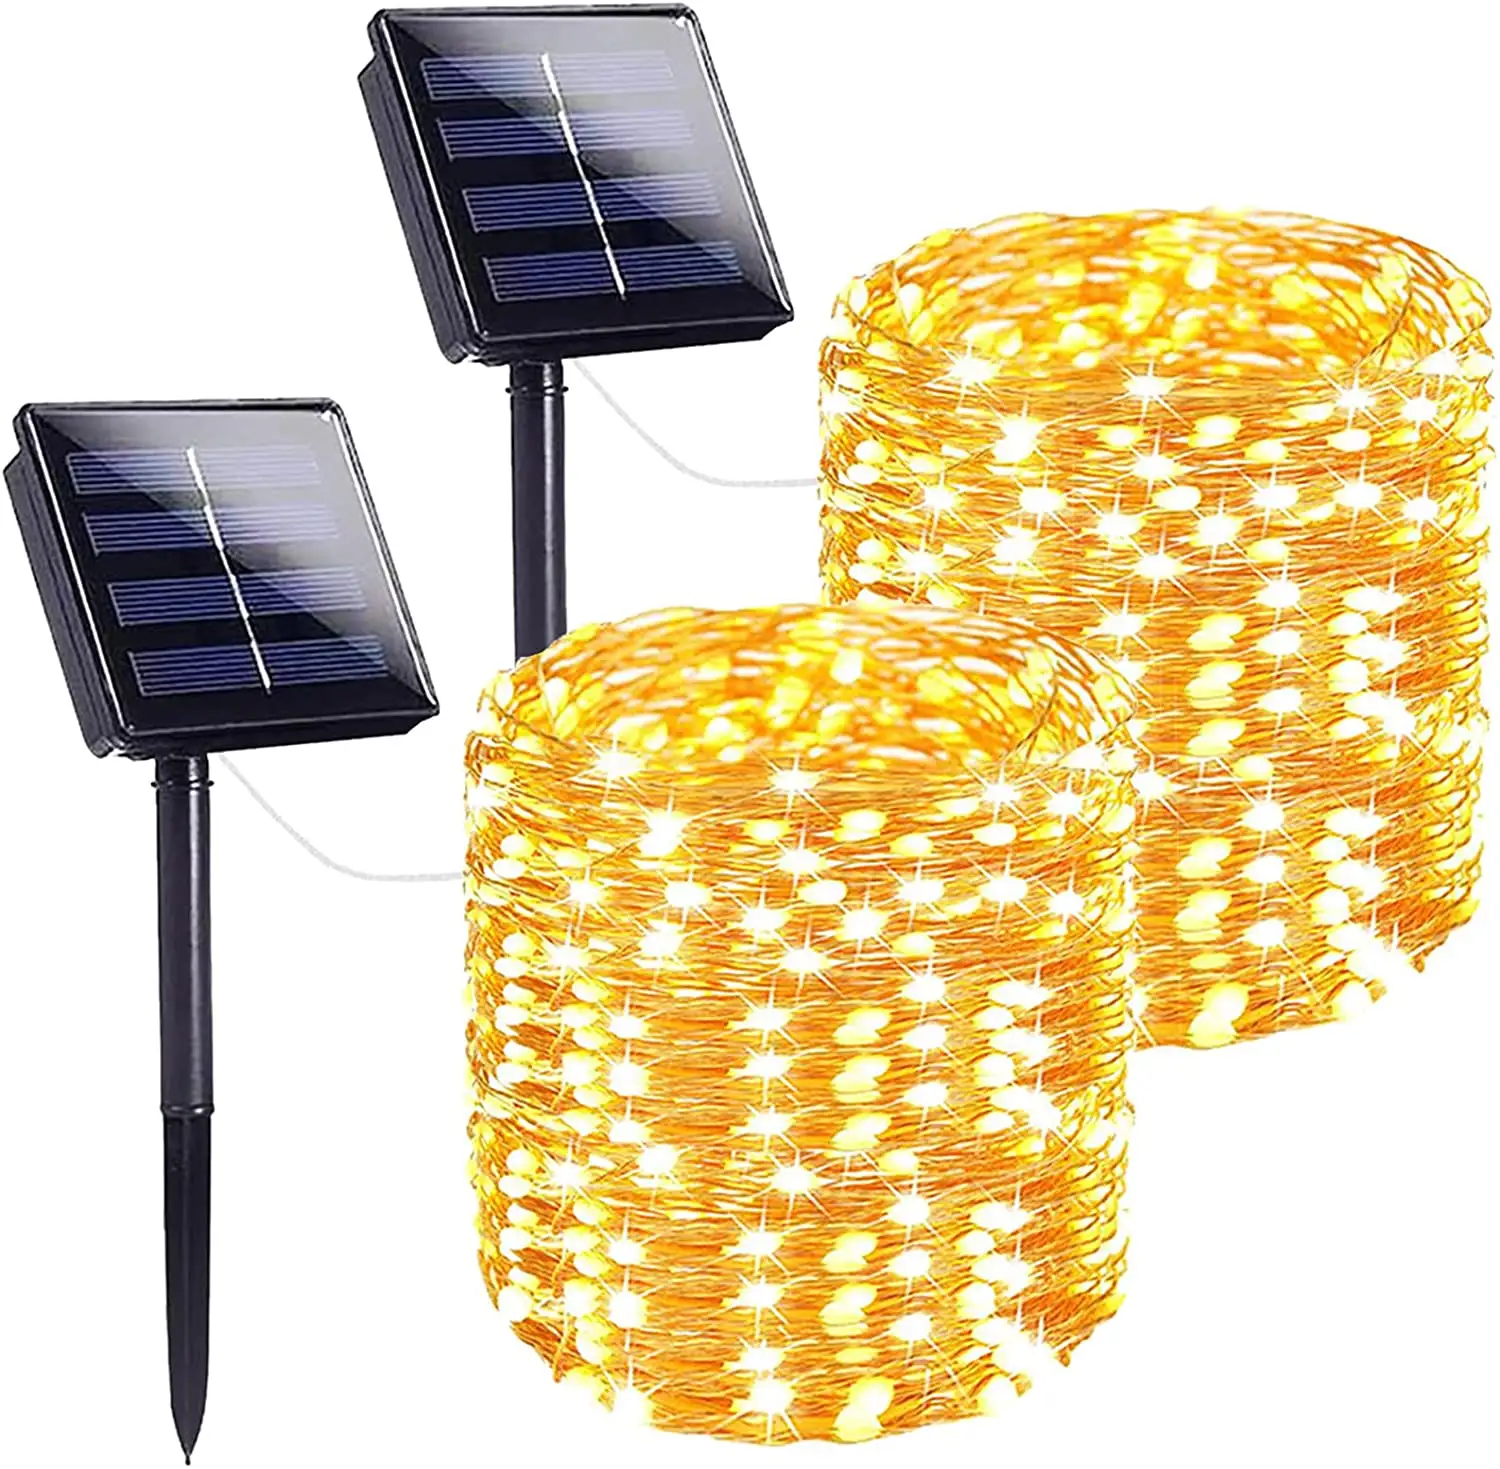 Waterproof Solar Fairy Lights, Solar String Lights Outdoor Copper Wire 8 Modes